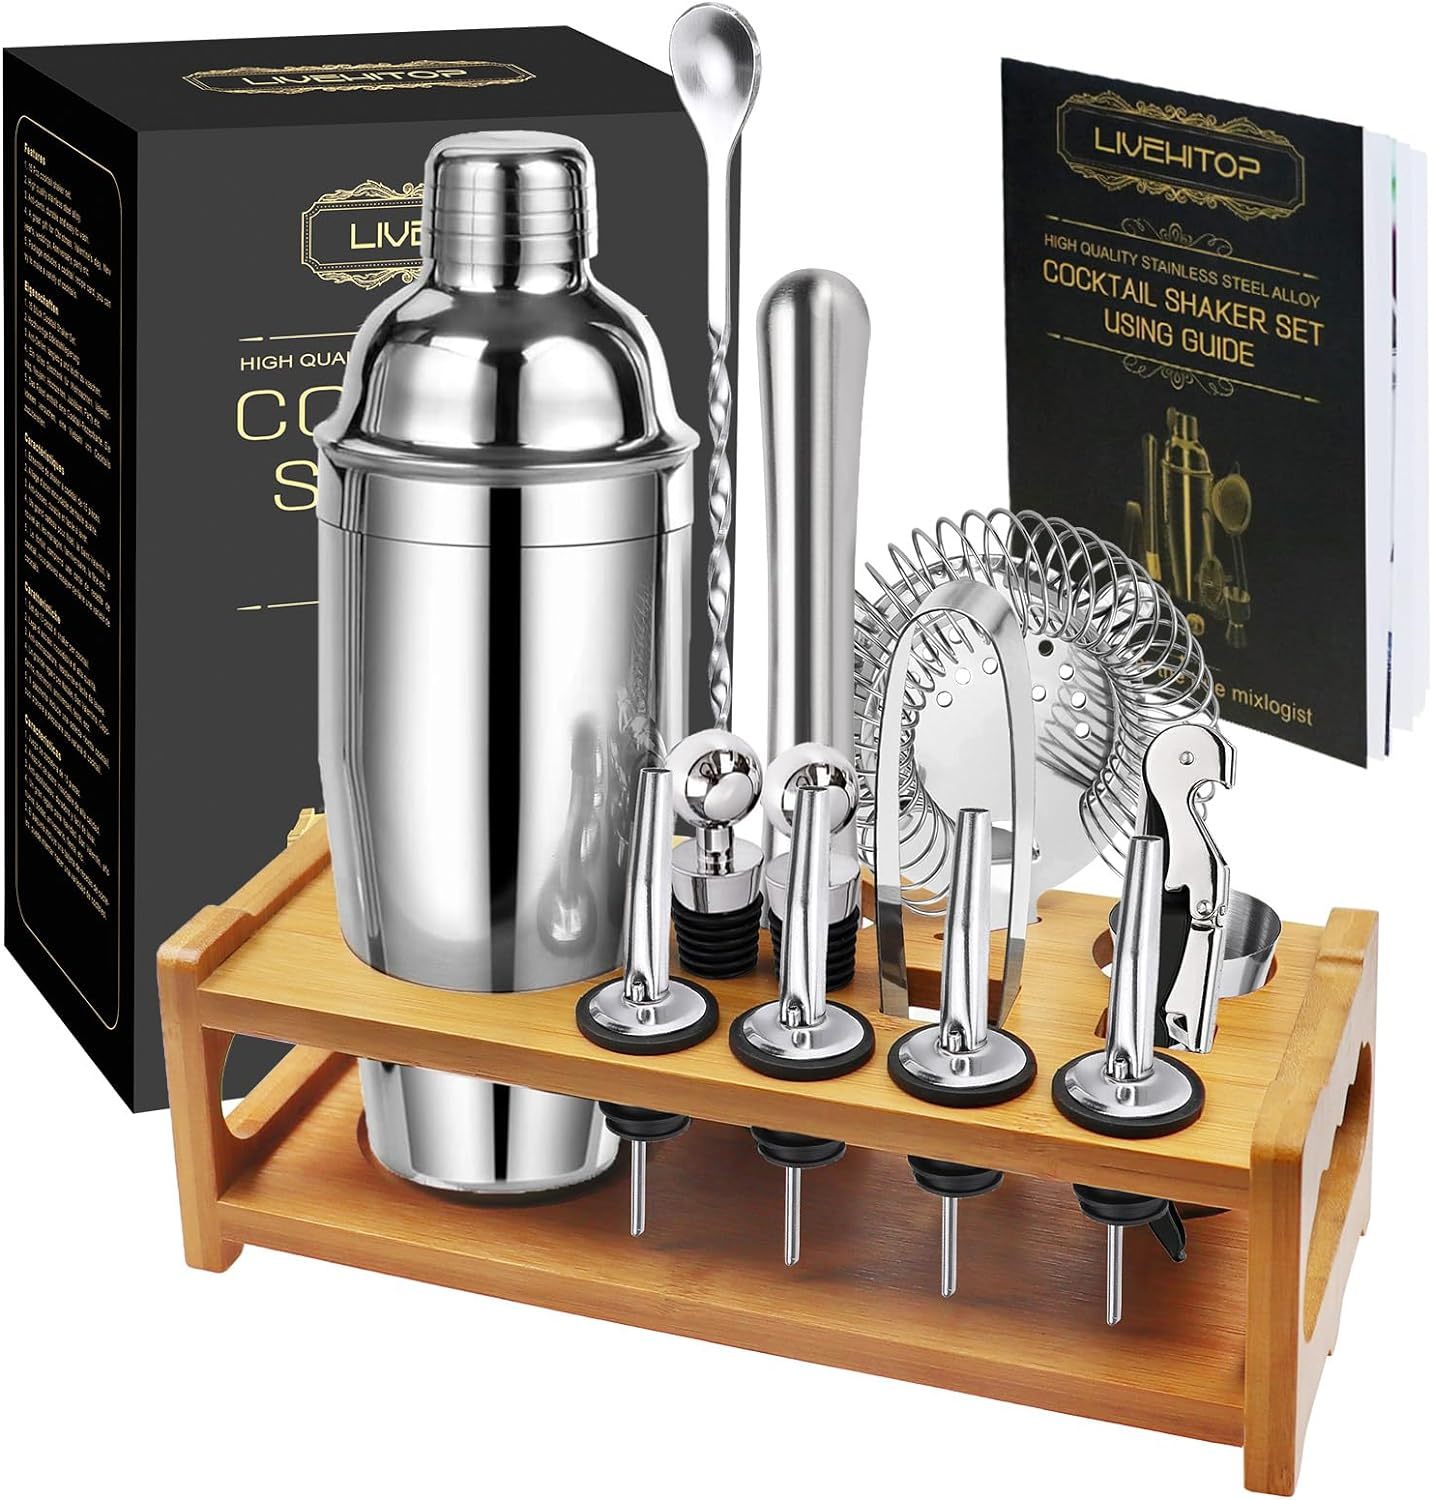 LIVEHITOP Cocktail Shaker Kit with Stand, Cocktail Set with 750ml Stainless Steel Shaker, Recipe Book, Cocktail Gift Set for Drink, Home, Bar, Party